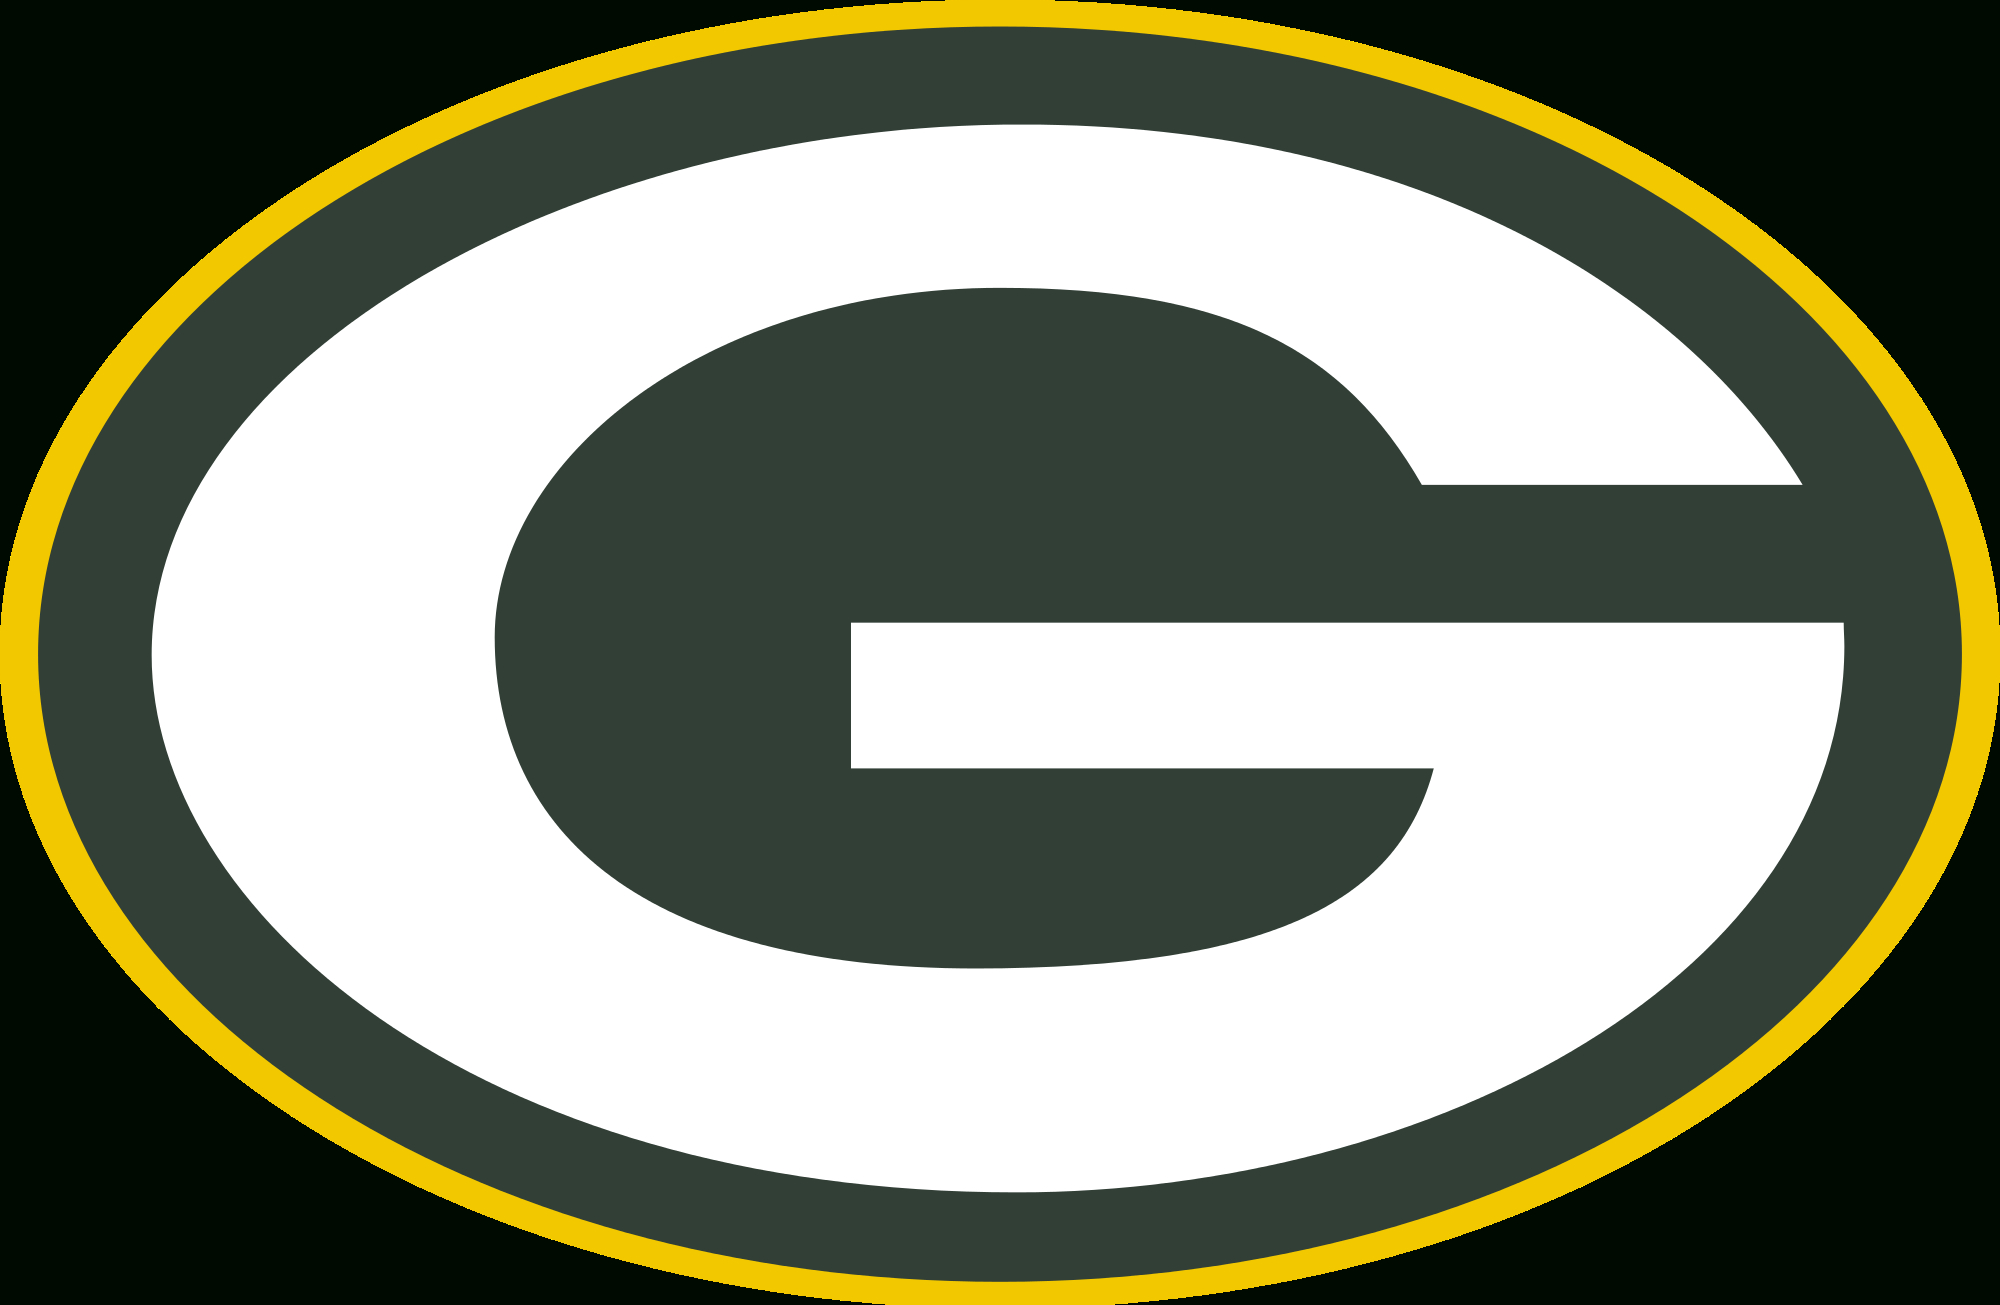 Free Packers Symbol Picture, Download Free Clip Art, Free Clip Art - Free Printable Green Bay Packers Logo